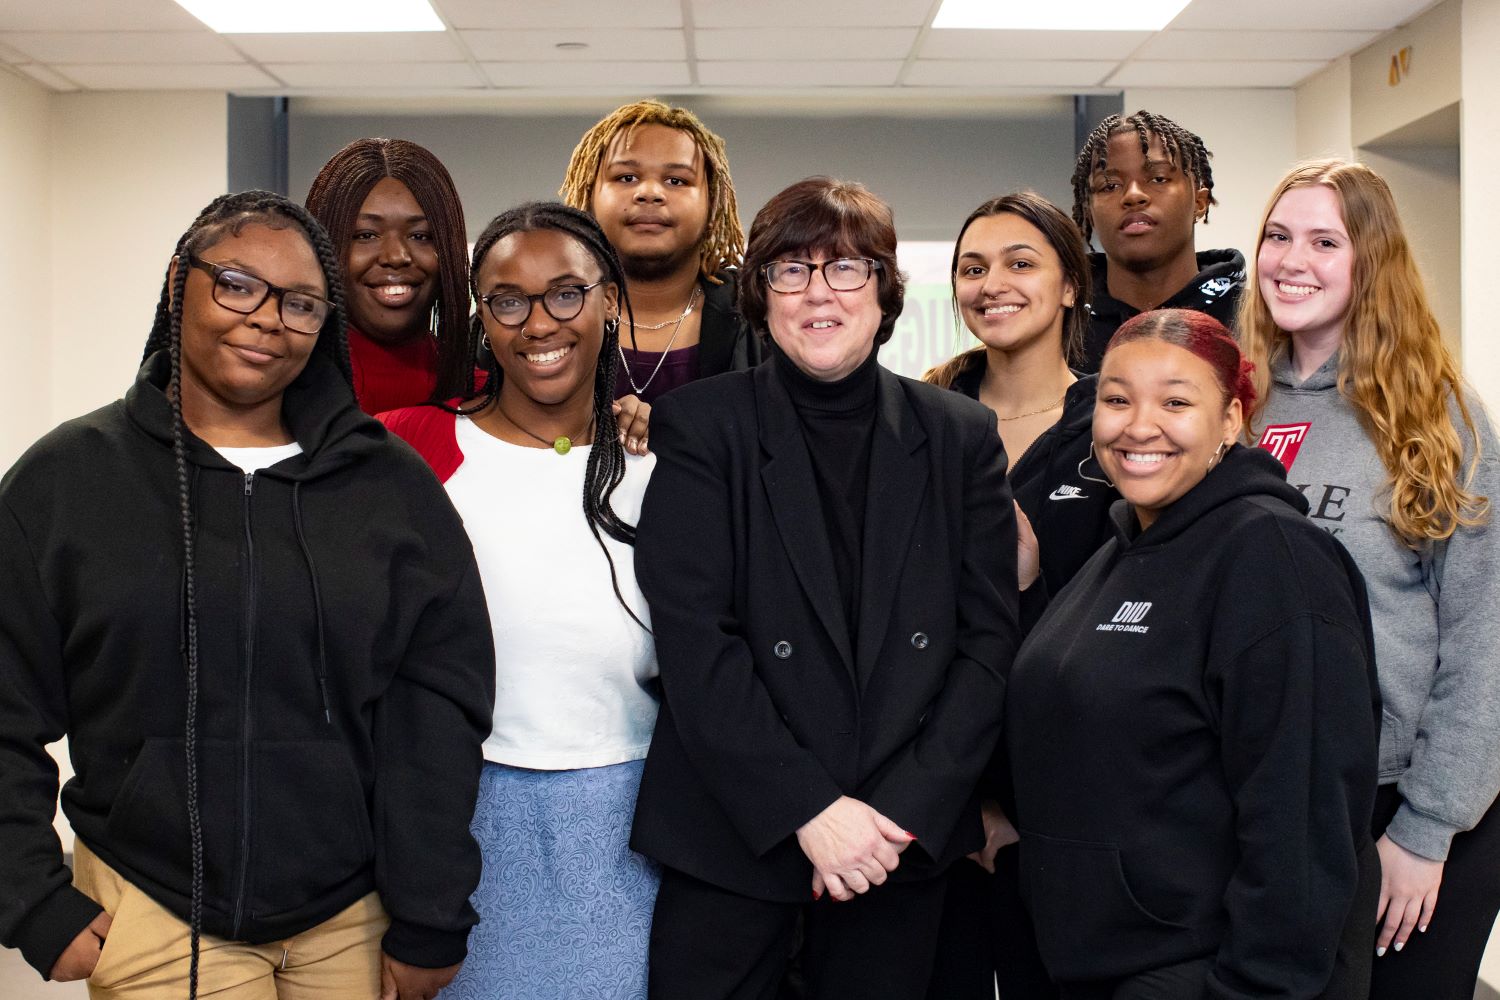 Tricia Jones (center) interacts with interns and students from Resolutionary Partners, the program she created to decrease violence in Philadelphia. From left to right: Nae Brown, Tosin Sanni, Nya Jarboe, Dante Harrell, Tricia Jones, Katie Weissenberg, Javon Clements, Ciara Chase and Carissa George. 